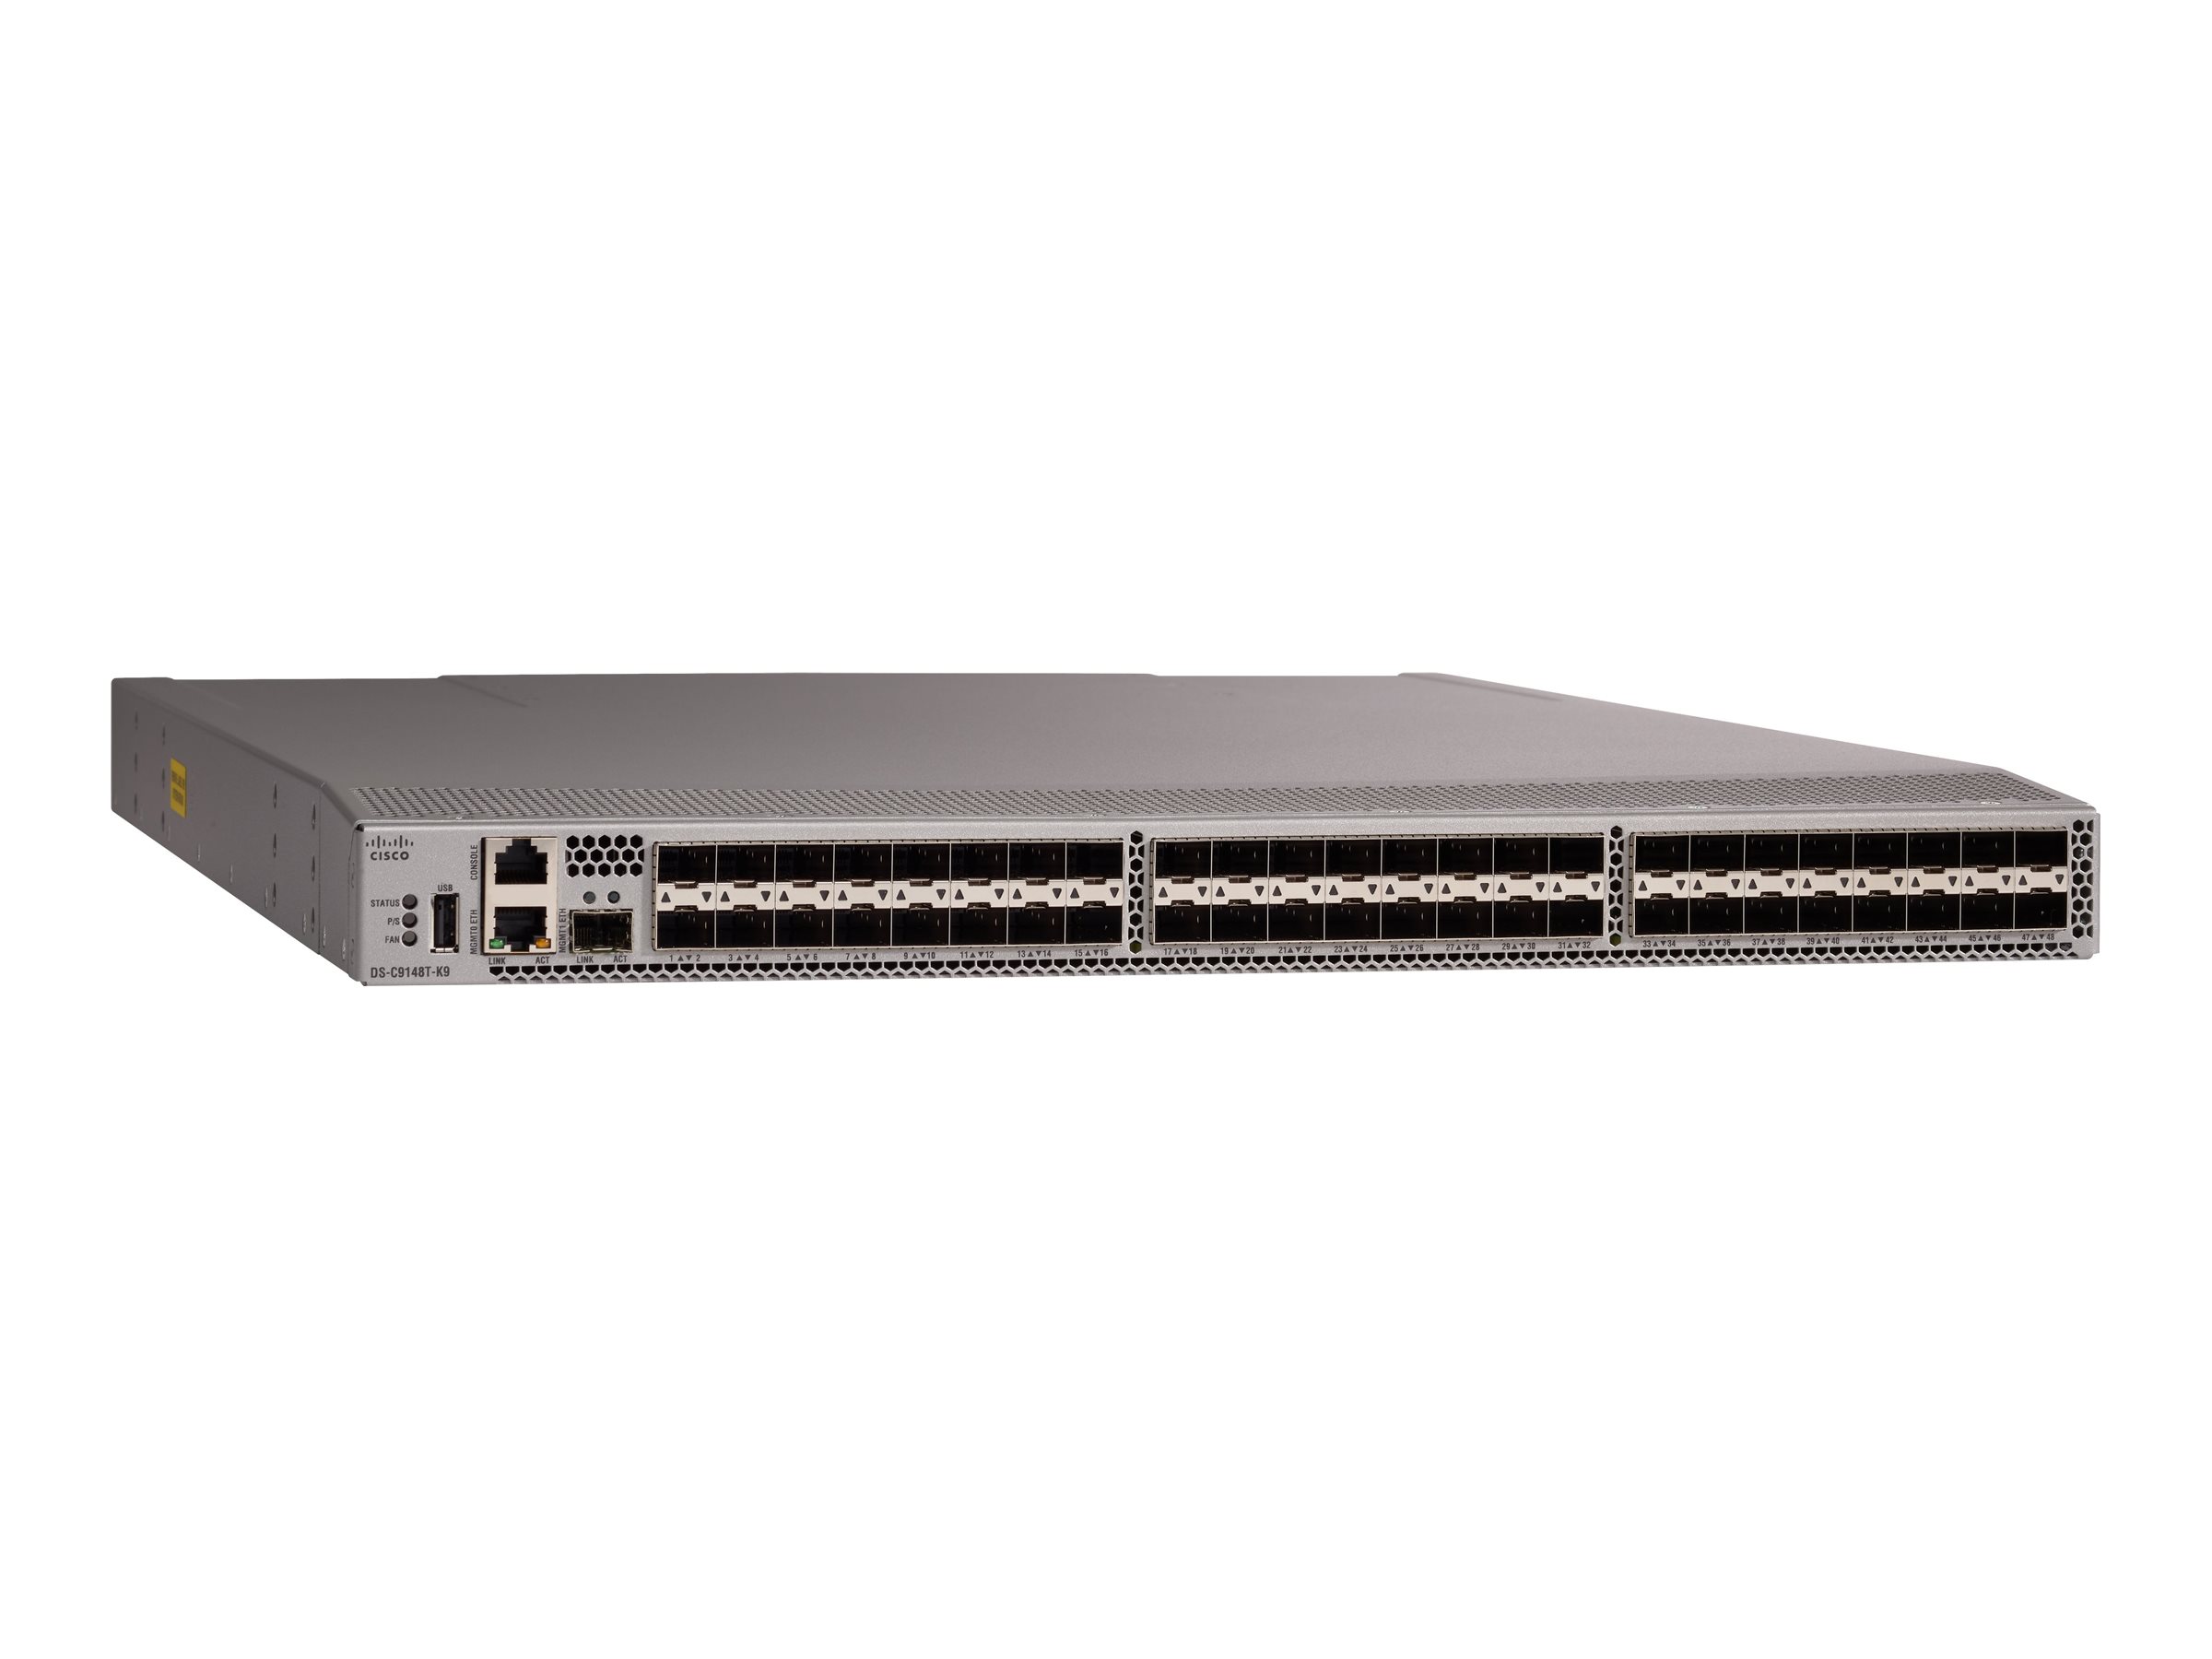 HPE SN6620C 32Gb 48/24 32Gb Short Wave SFP+ Fibre Channel v2 Switch - C-Series - Switch - managed - 24 x 32Gb Fibre Channel SFP+